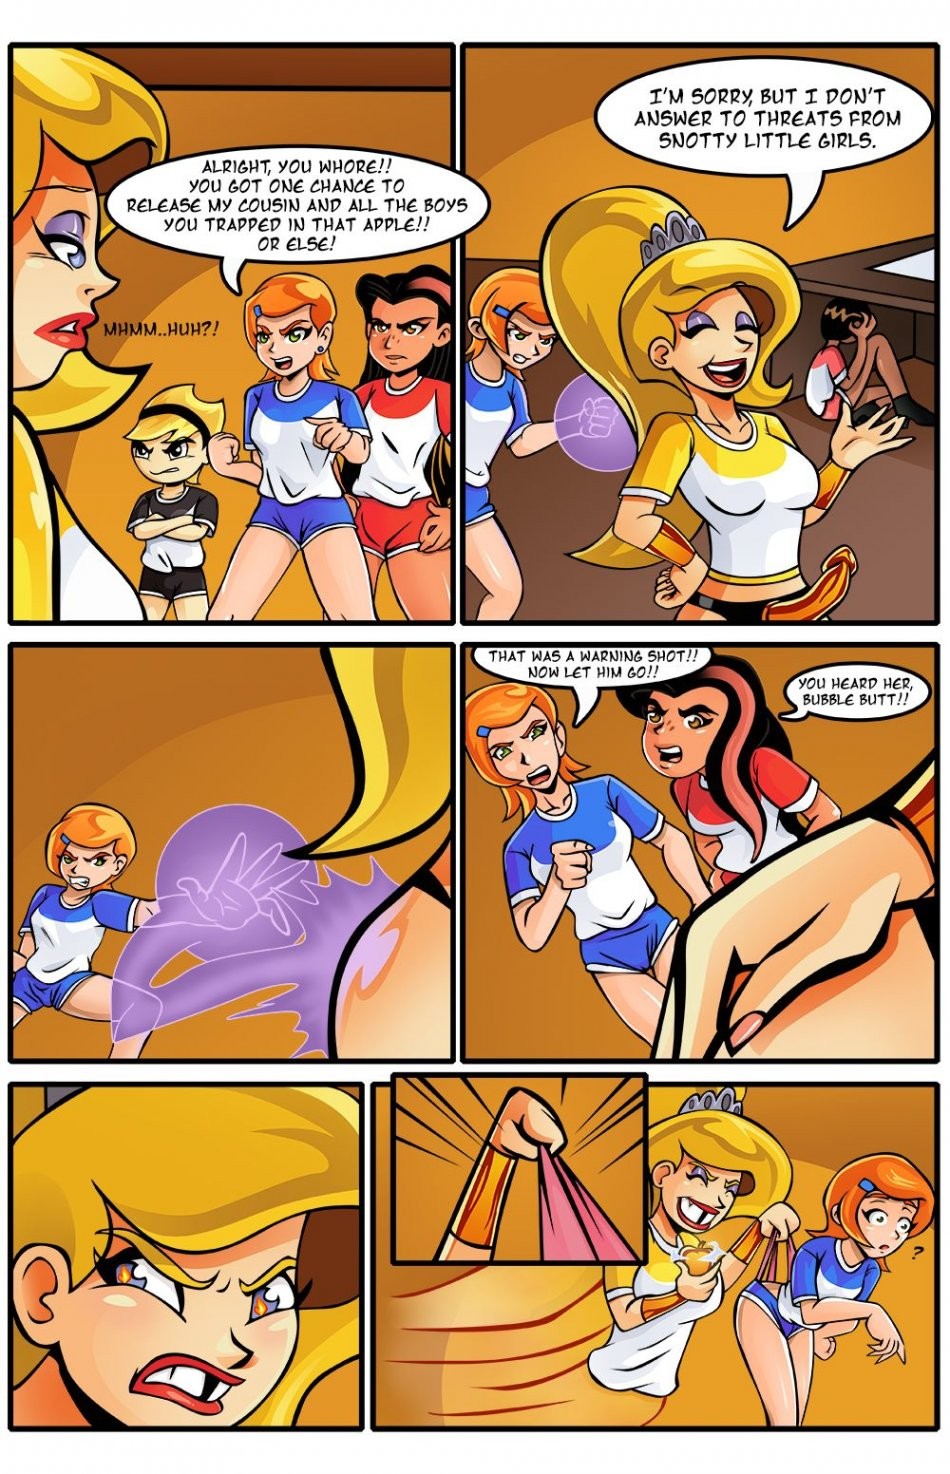 Camp Woody - Camp Chaos porn comic picture 9